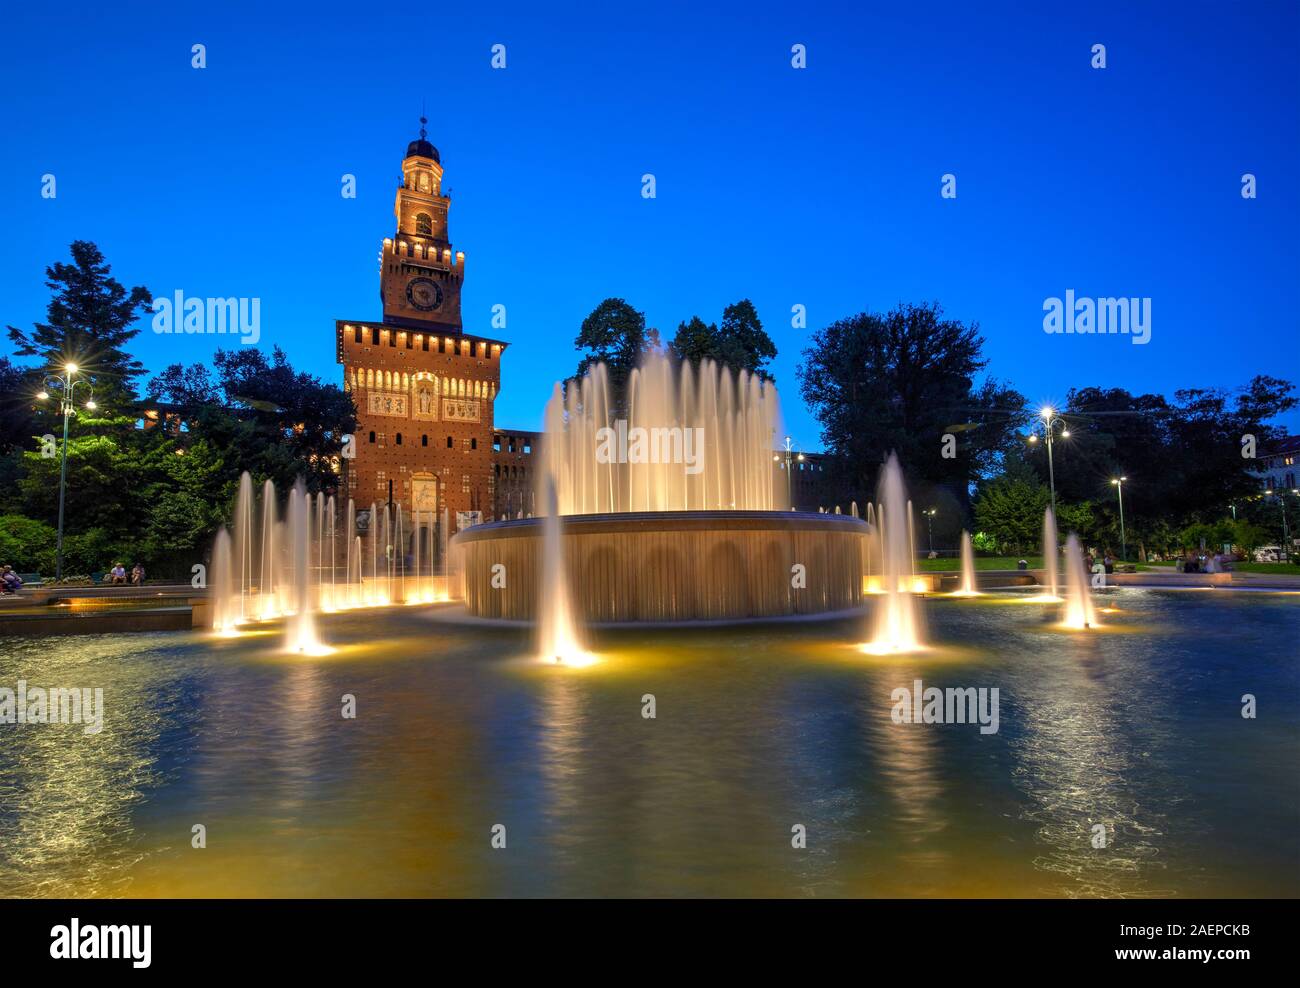 The Sforza Castle with the fountain illuminated at blue hour, Milan, Italy Stock Photo